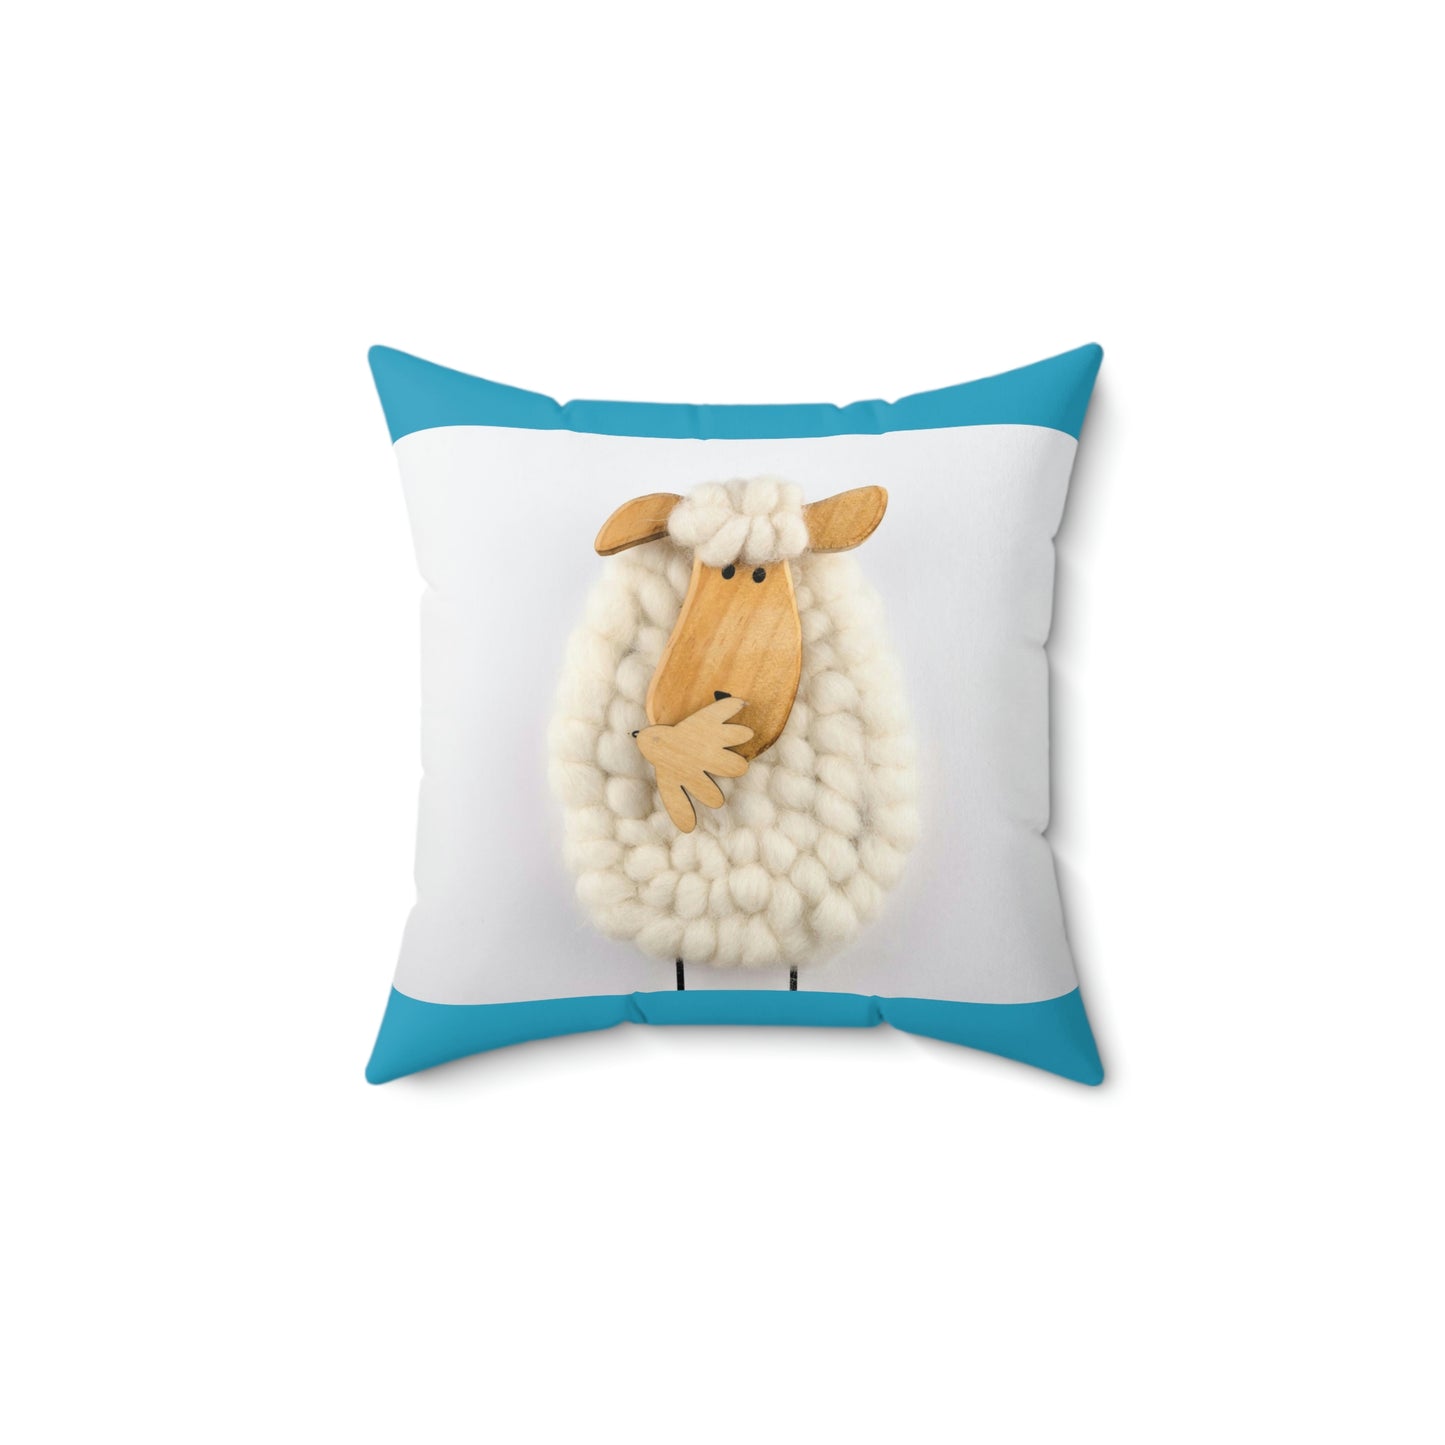 Sheep Pillow Case - Sky Blue and White Colors - Faux Suede Square Pillow Case